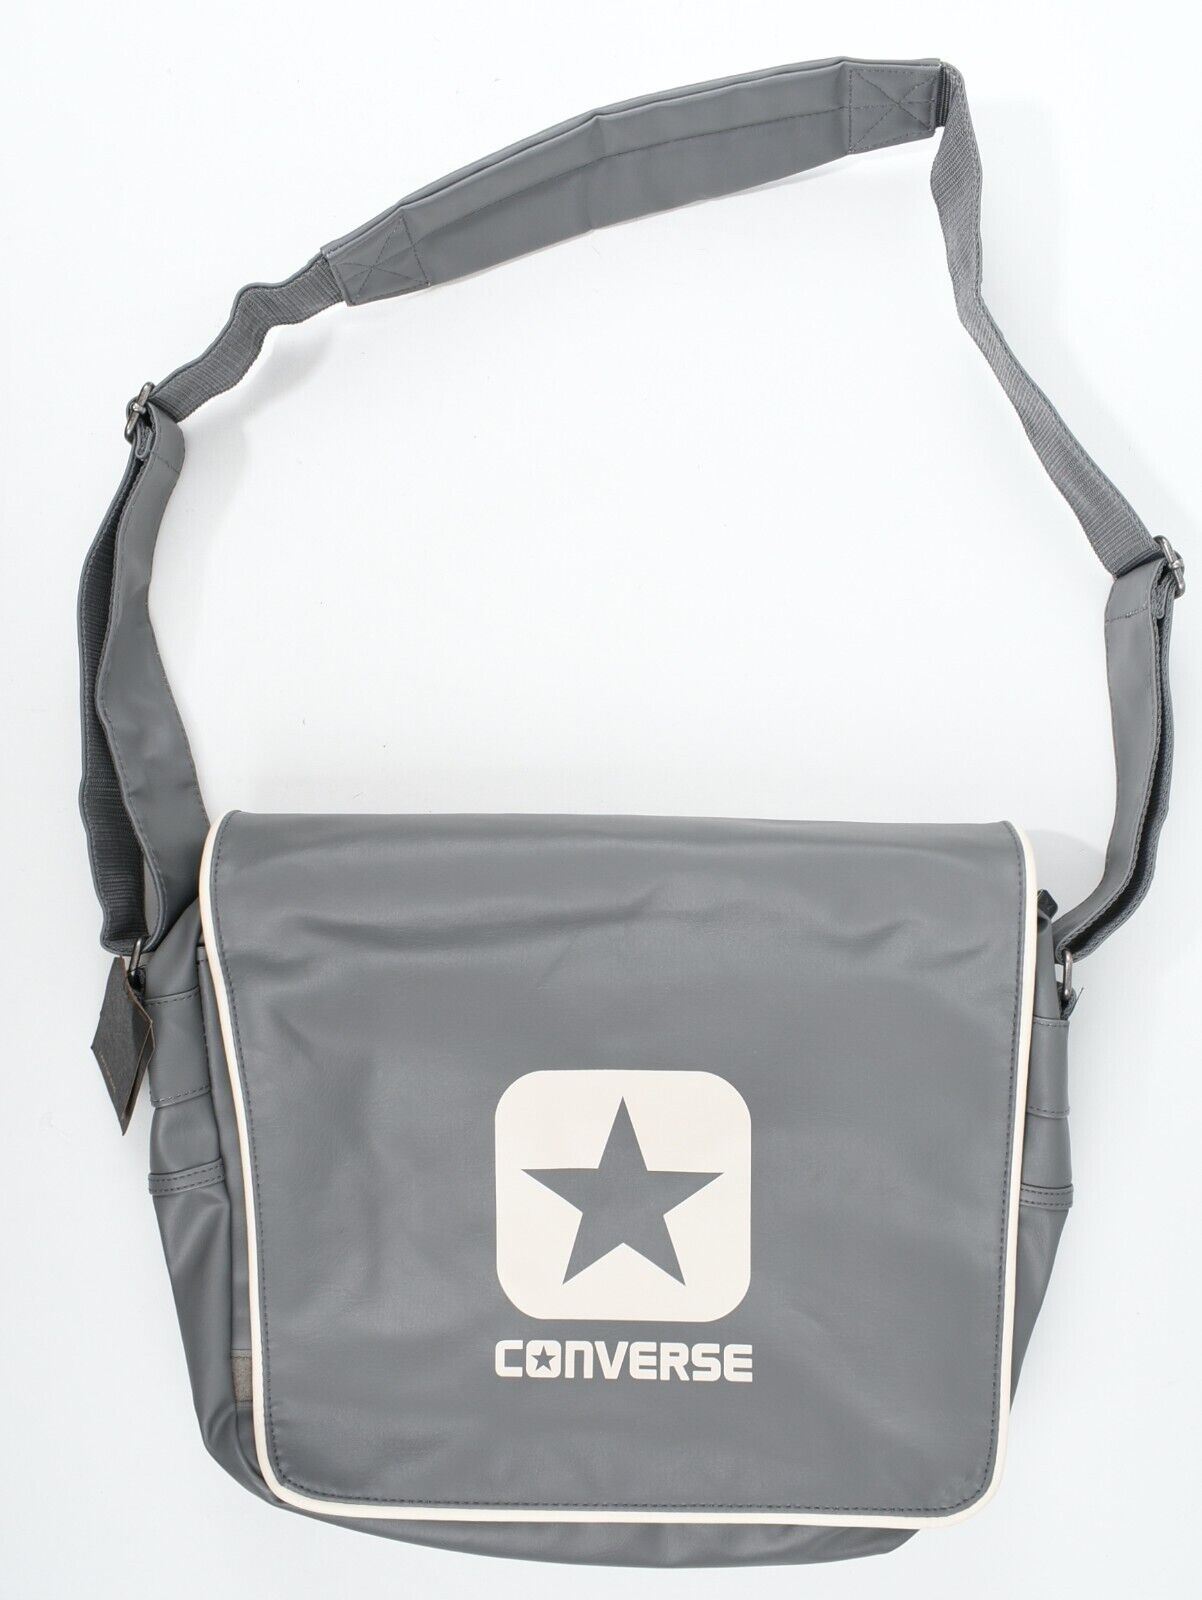 CONVERSE Flap Reporter Messenger Bag, Faux Leather, Charcoal Grey/Ivory